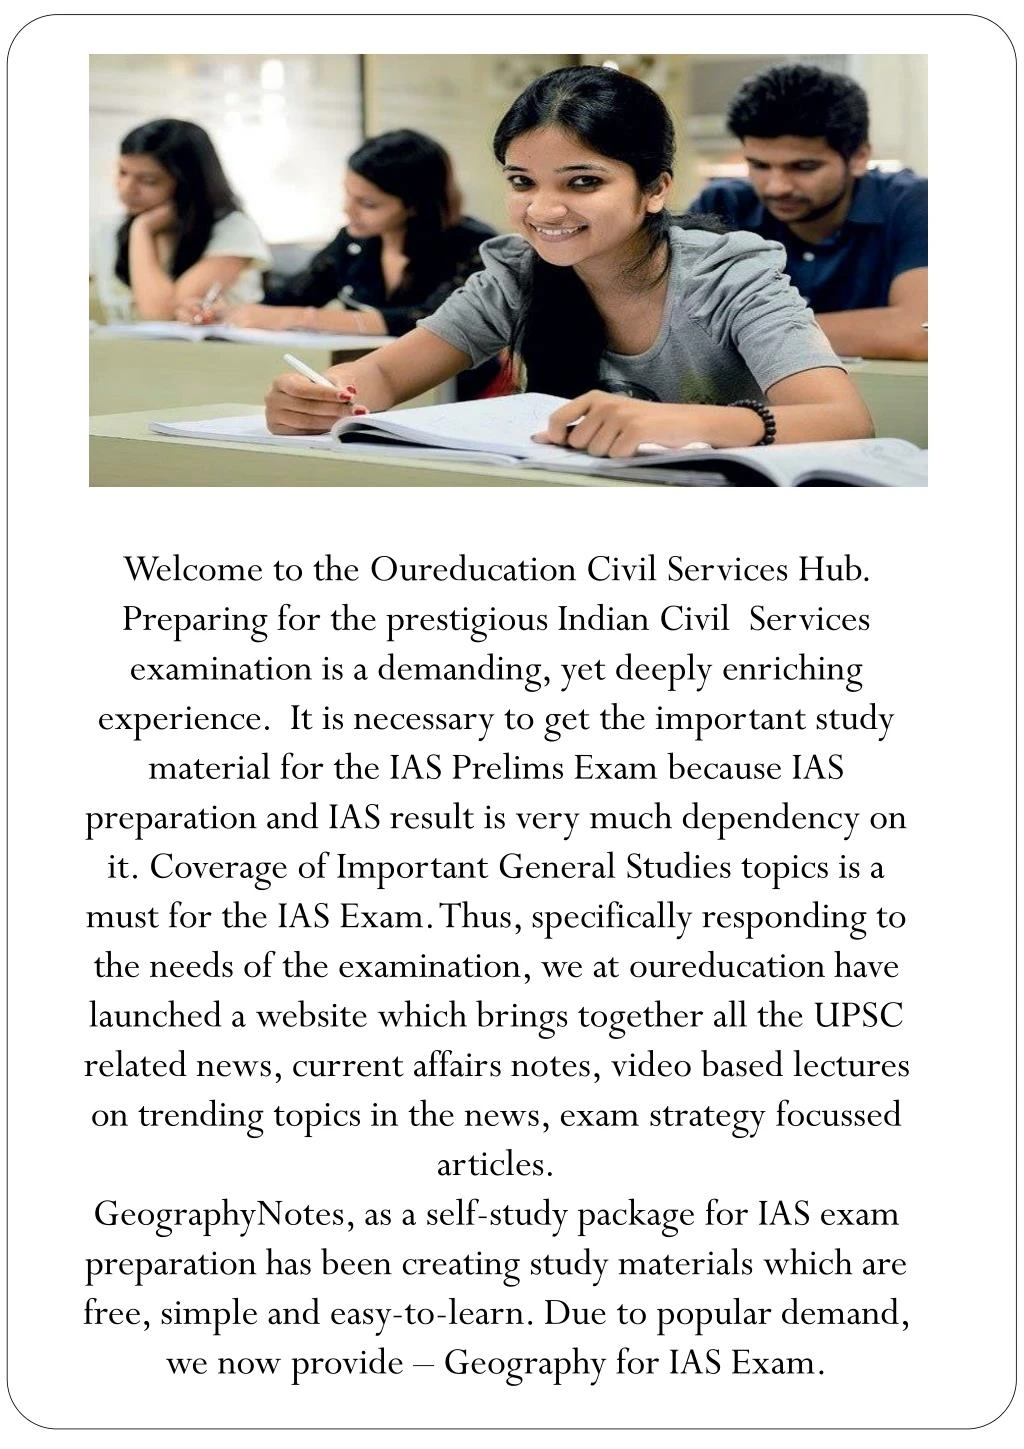 welcome to the oureducation civil services